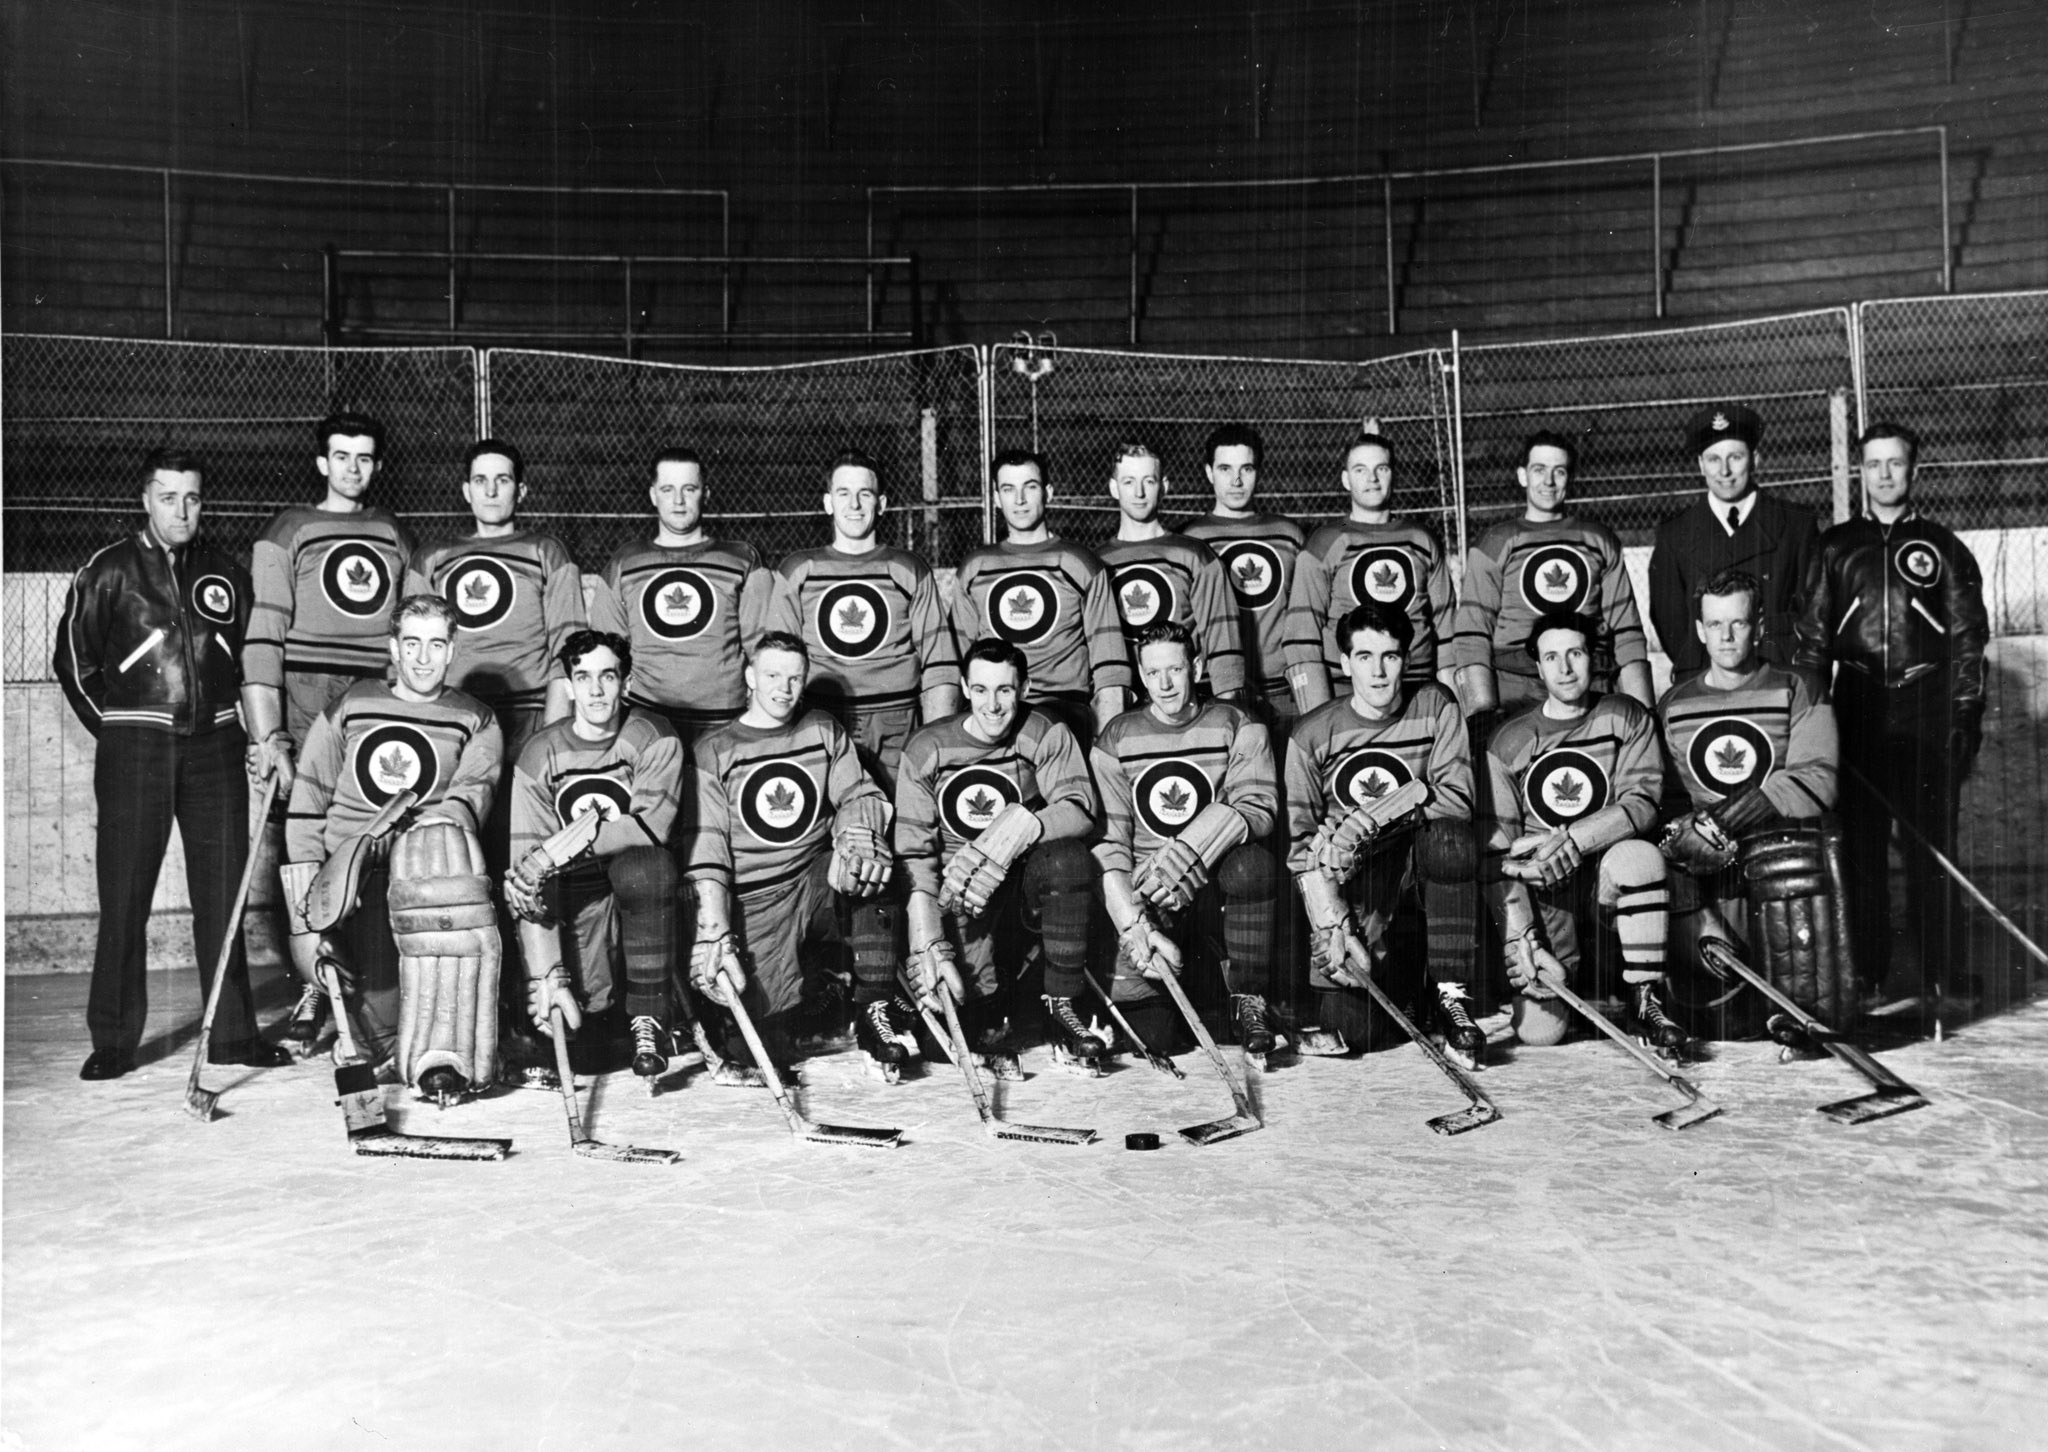 Photo: Official Oct 29 1947 TEAM PHOTO of R.C.A.F. Flyer Hockey Team Inverted